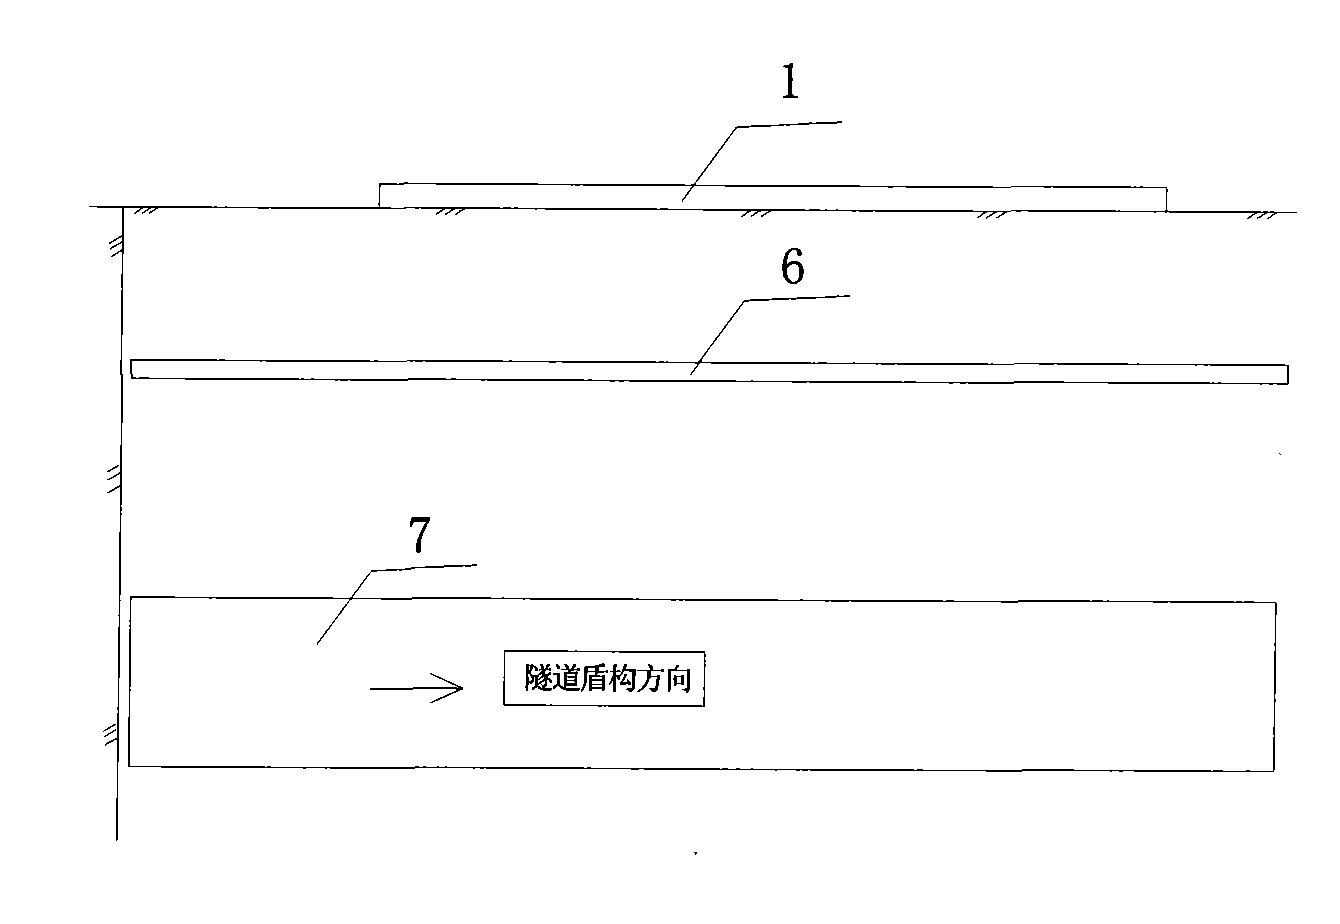 Method for monitoring the settlement by using inclinometer tube